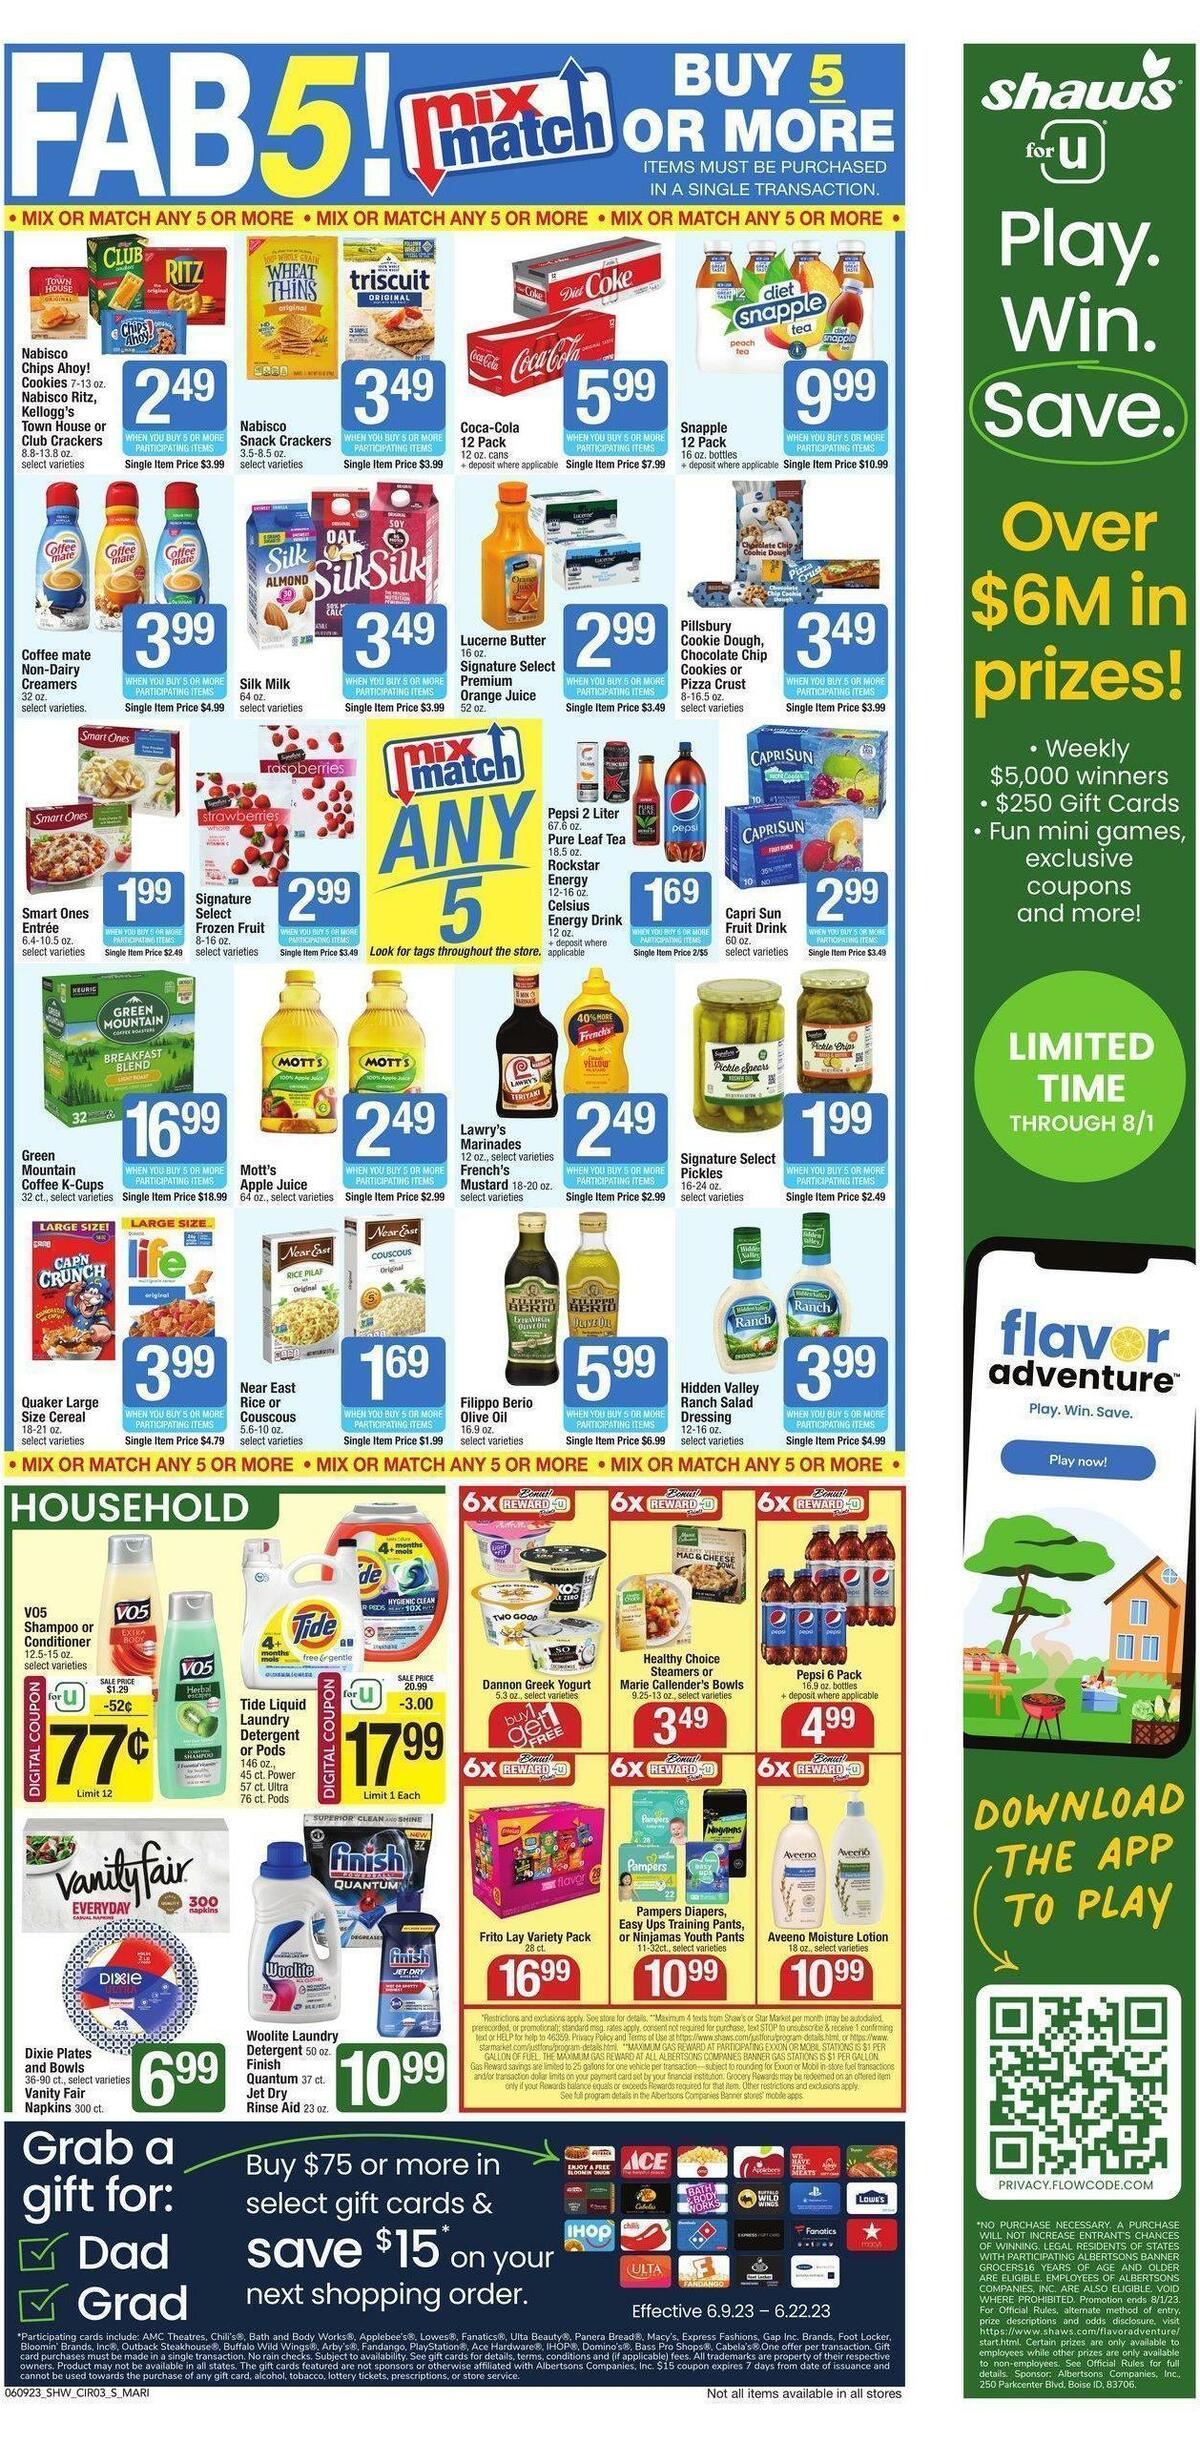 Shaw's Weekly Ad from June 9